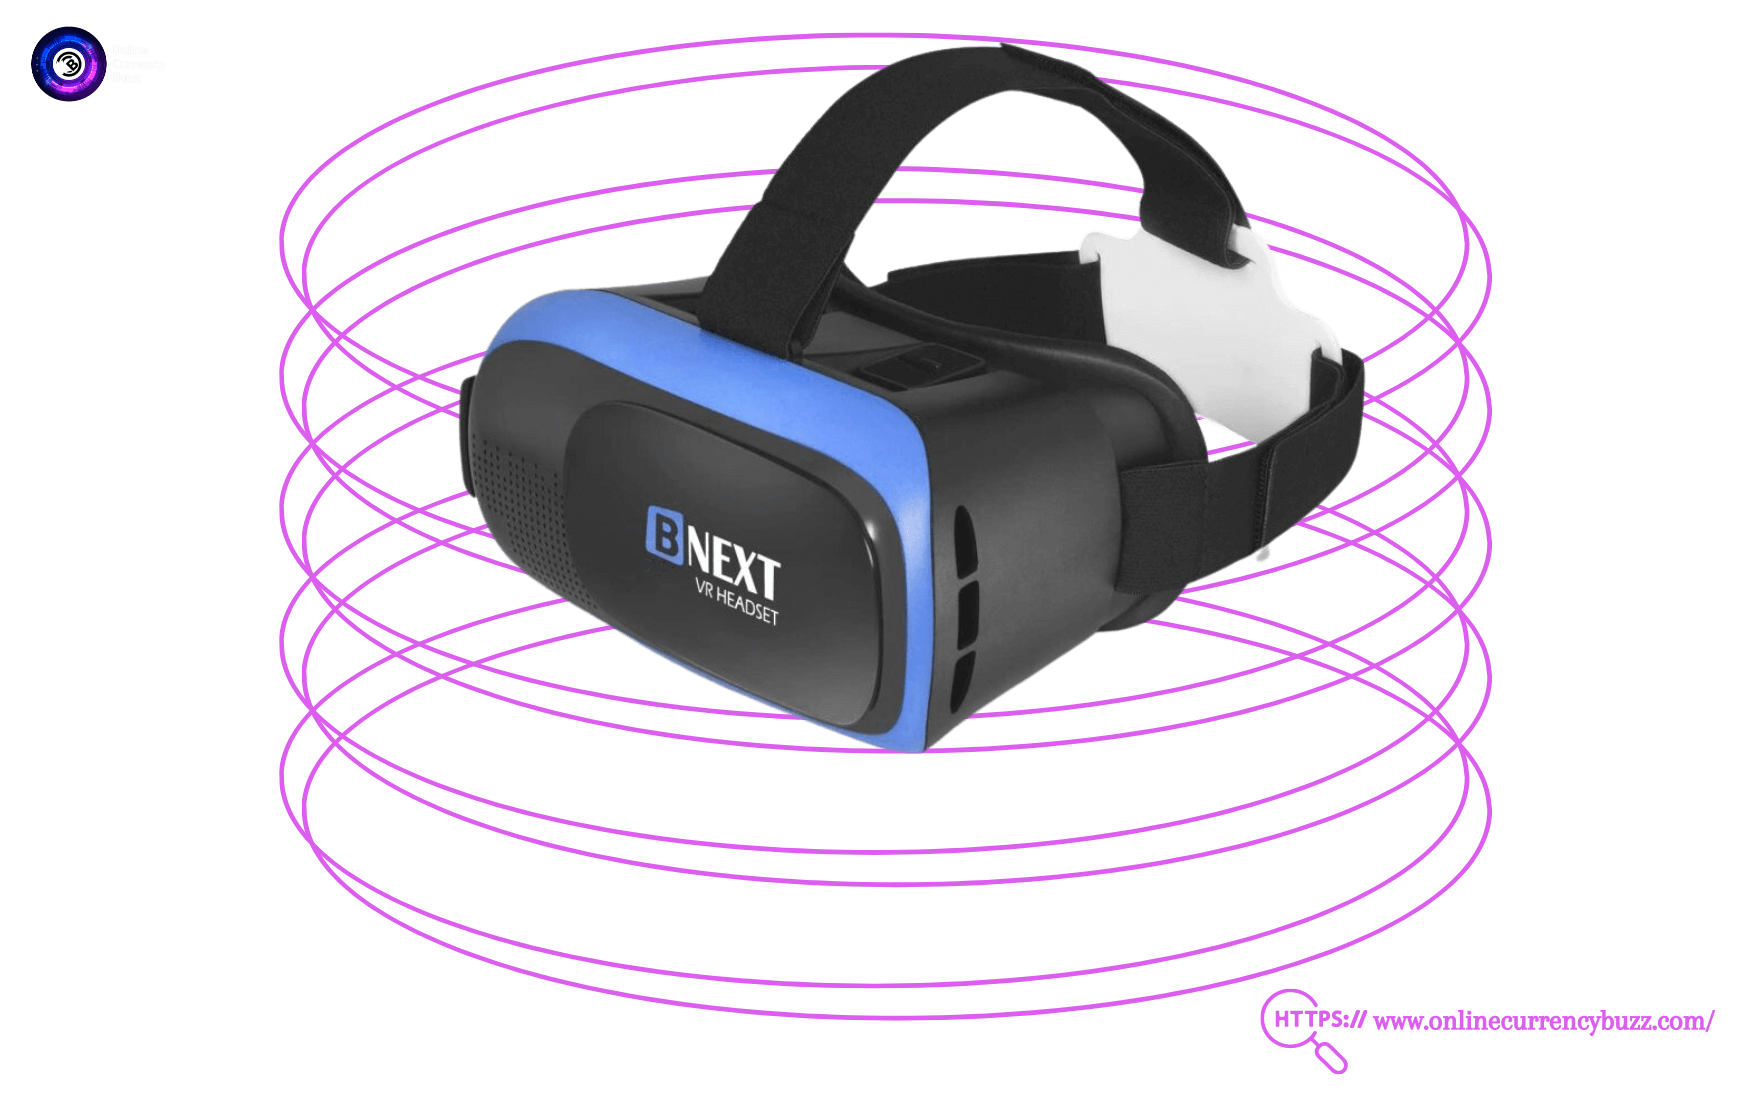 The BNEXT Virtual Reality Headset